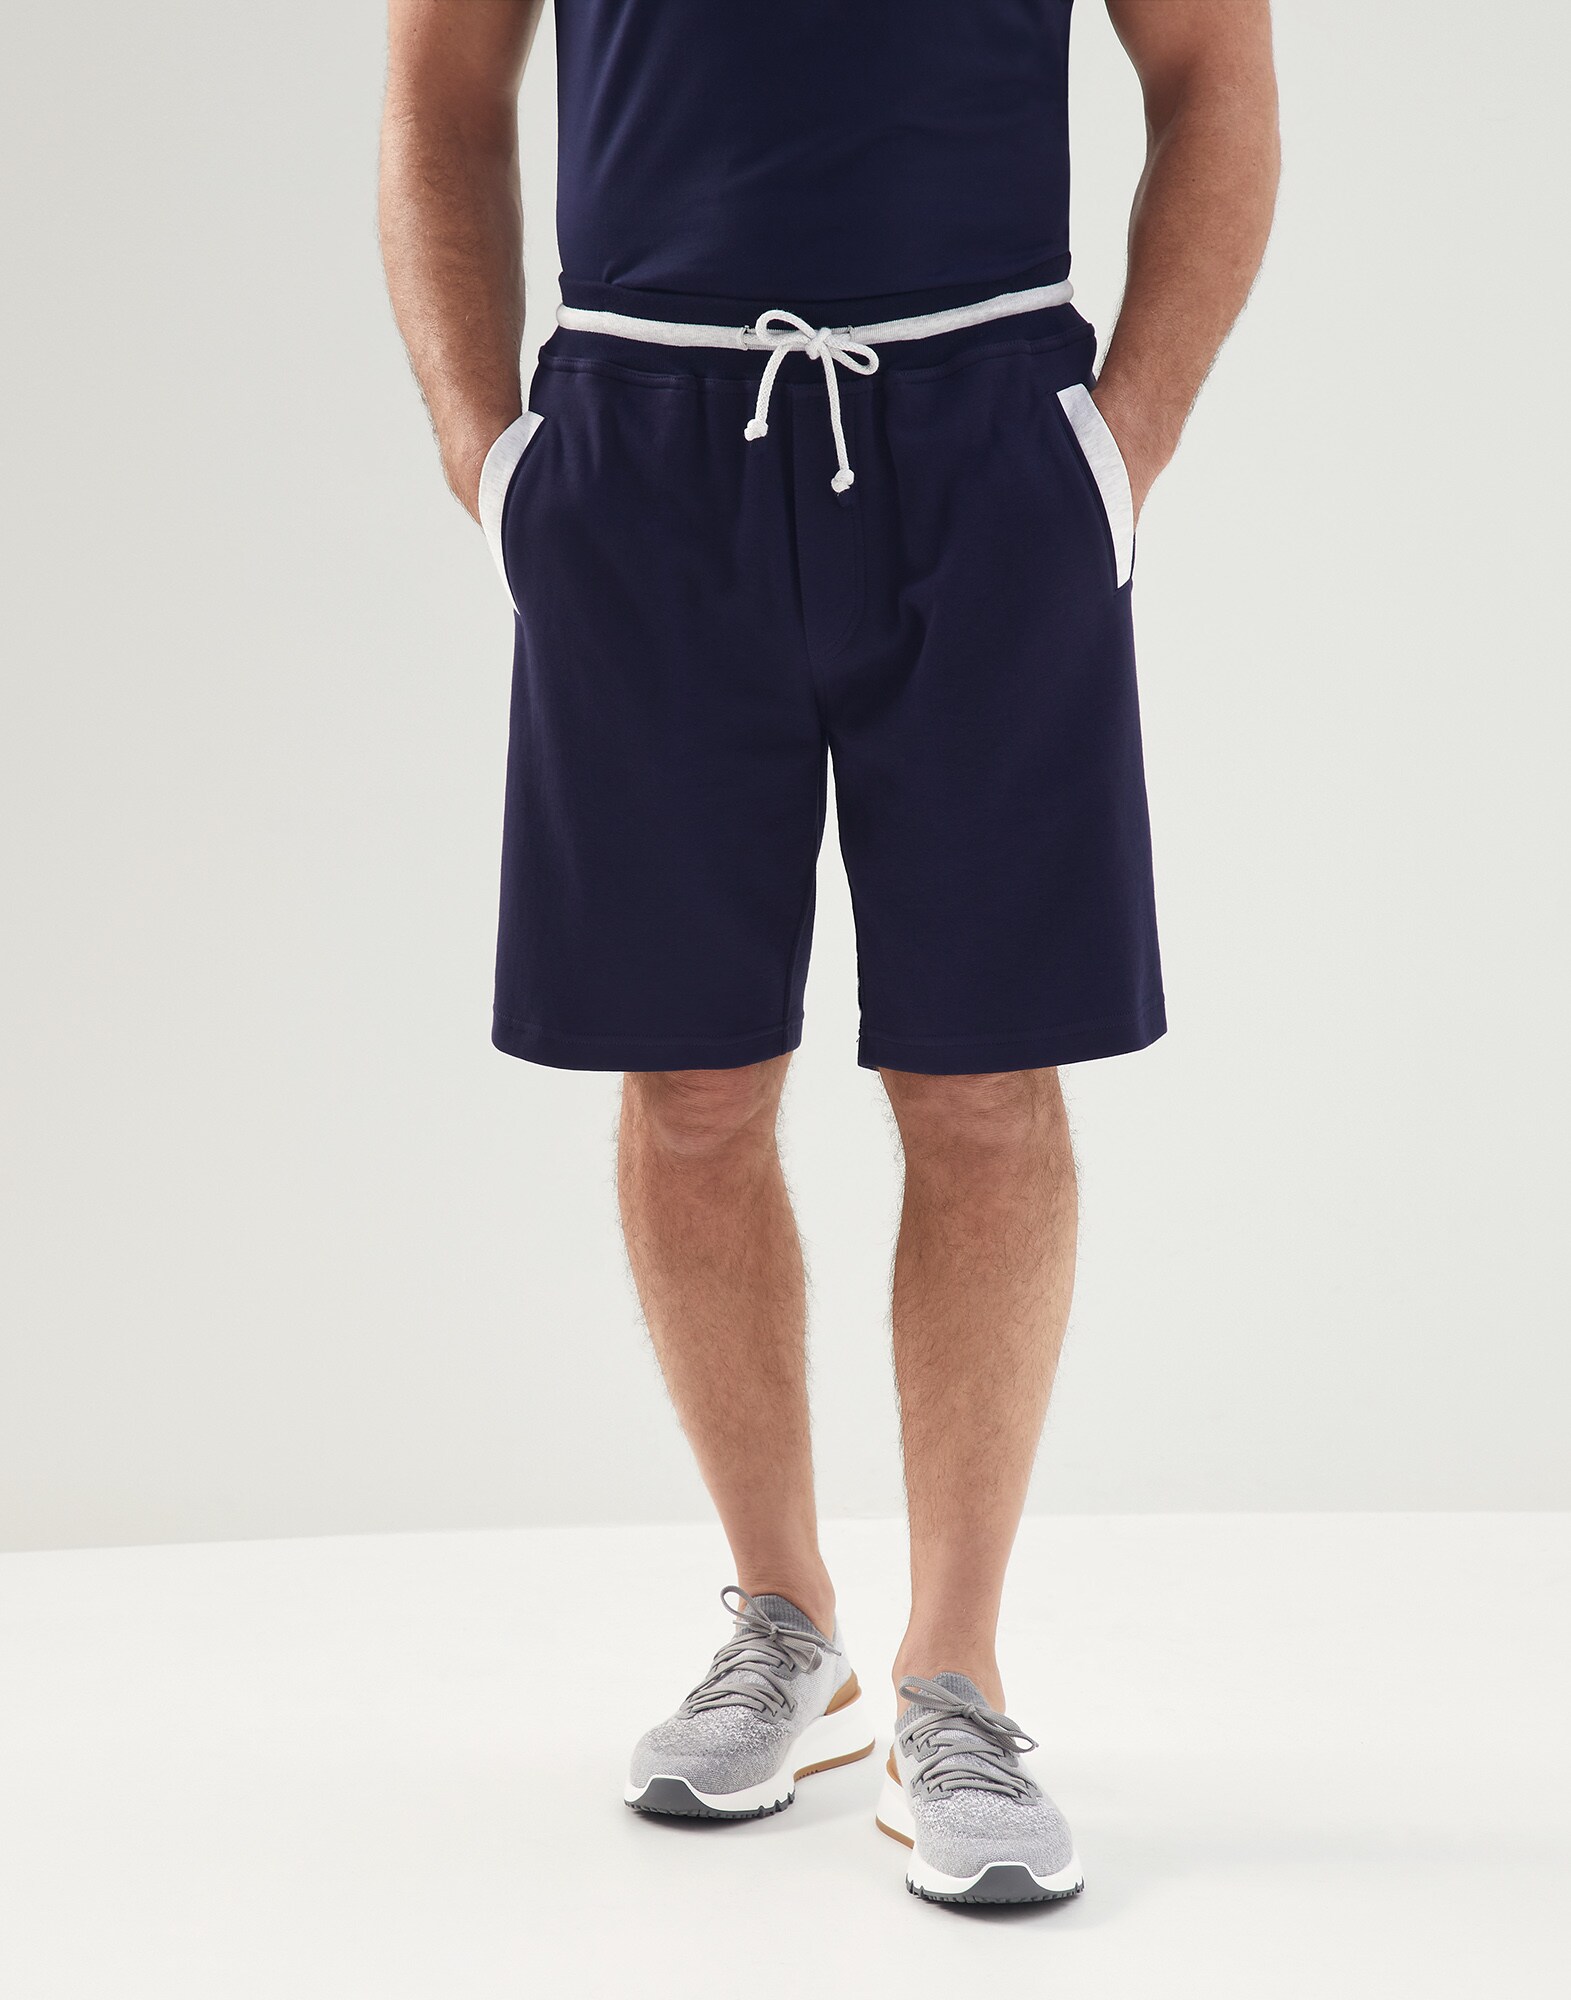 French terry Bermuda shorts